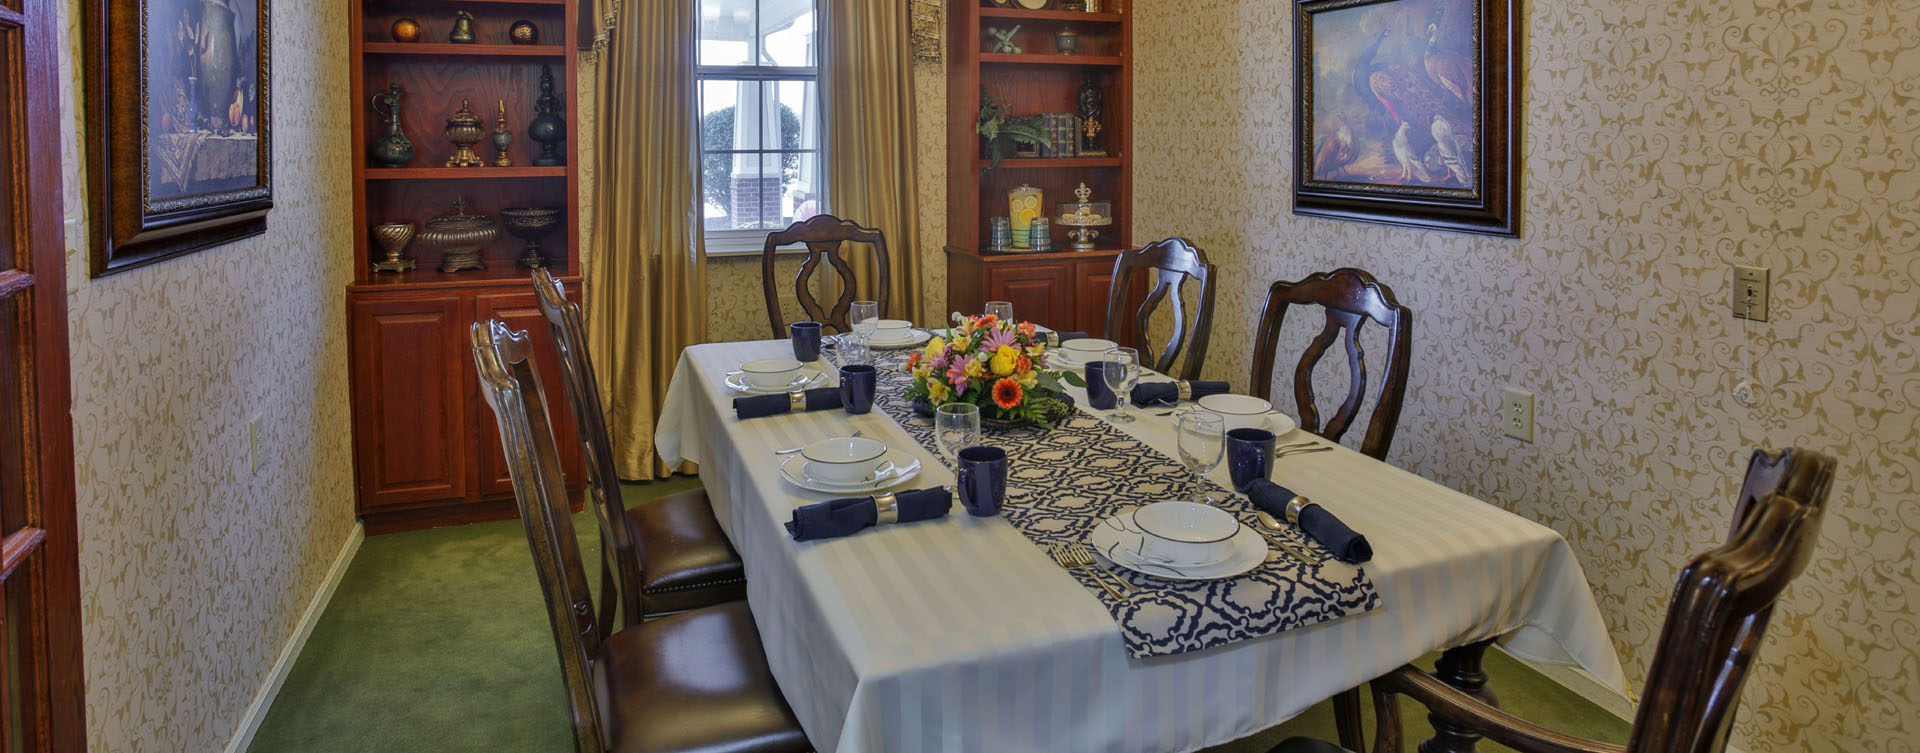 Have fun with themed and holiday meals in the private dining room at Bickford of Lafayette